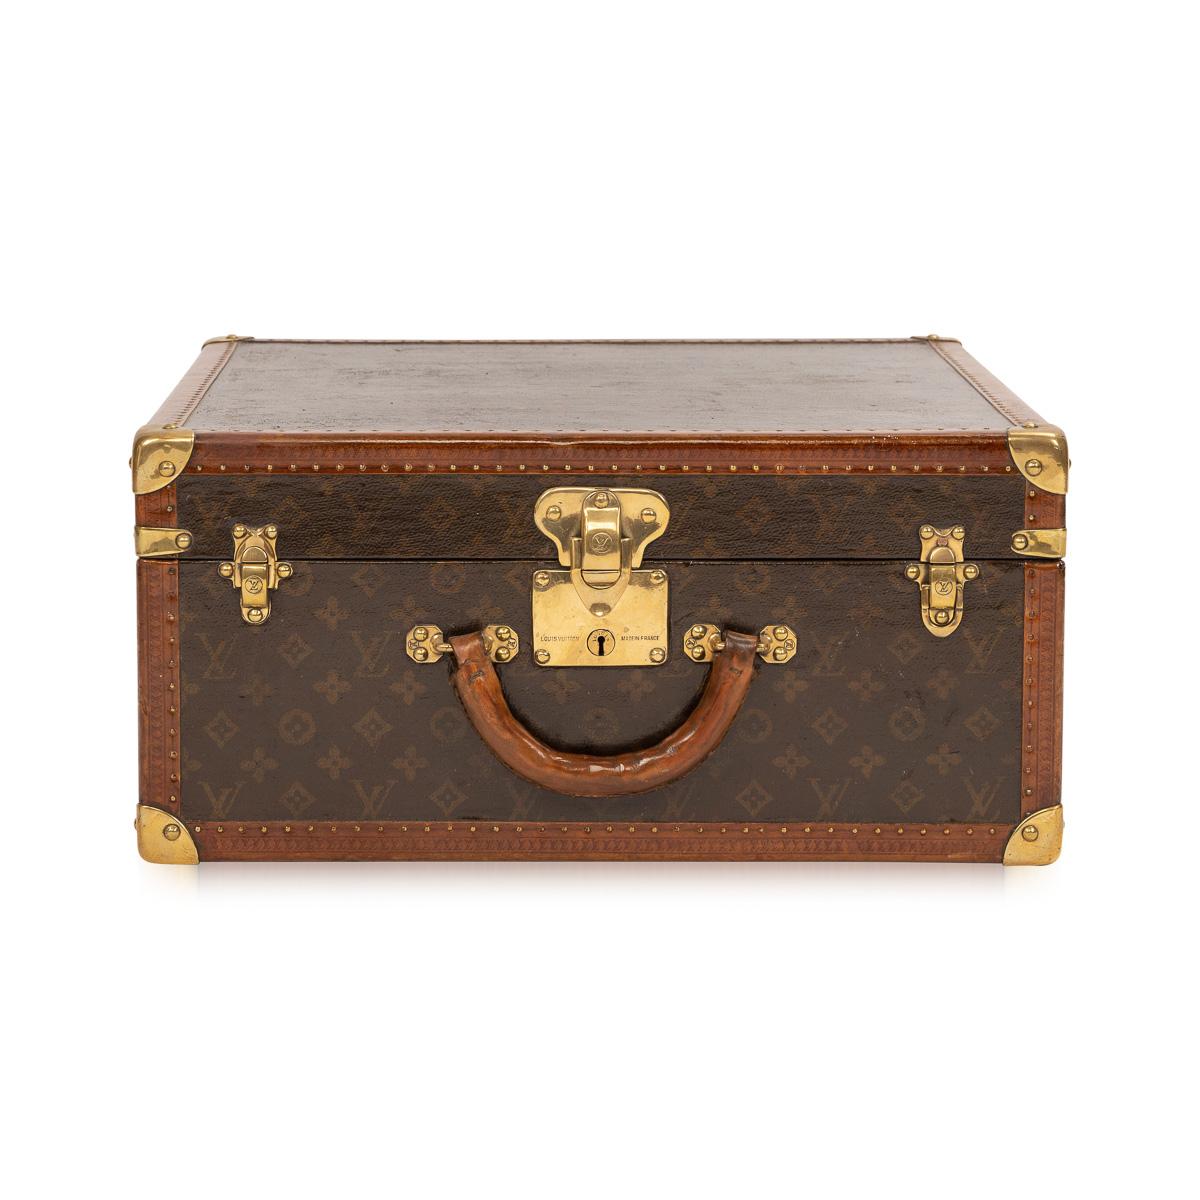 A stunning Louis Vuitton hat trunk in stencilled monogrammed canvas with lozine and brass trim, made in France, circa 1930. This trunk is a must have item for any elite traveller harking back to times of passenger ships and 1st class travel of